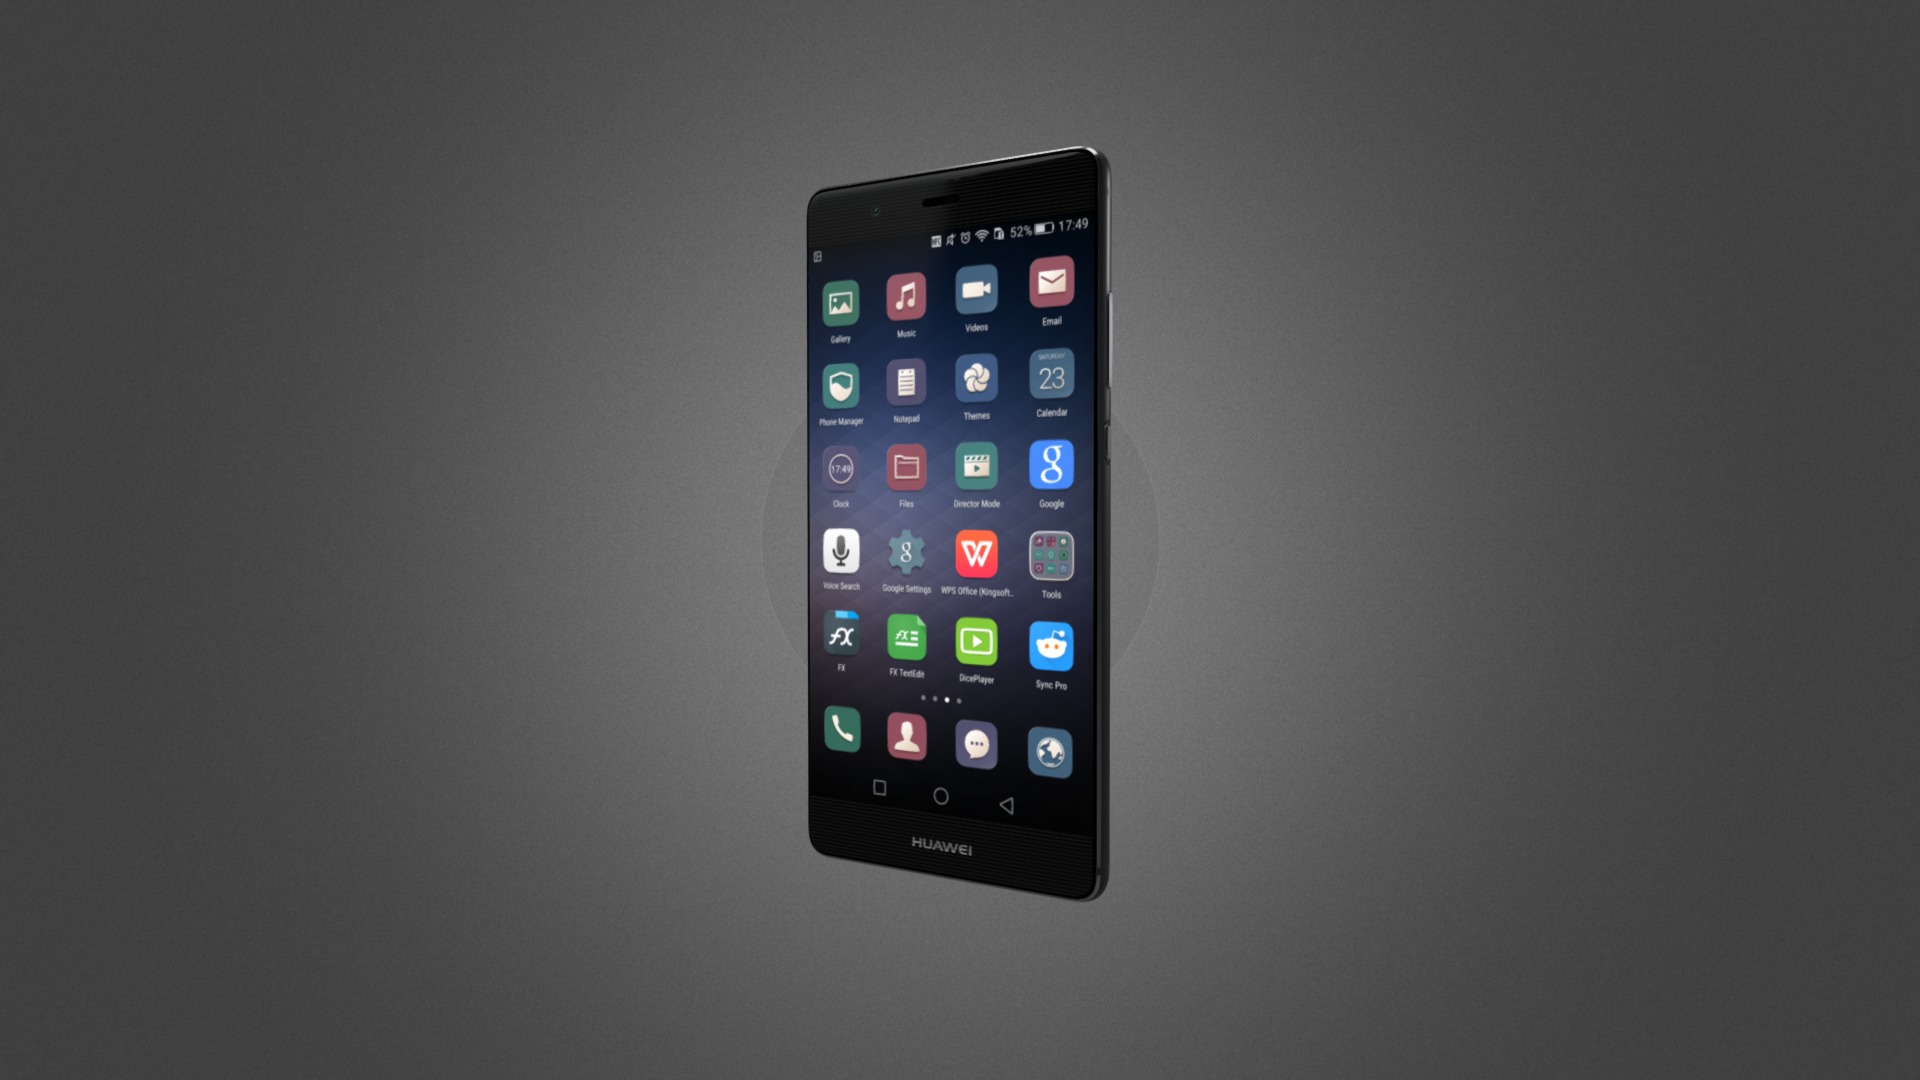 3D model Huawei P9 Plus for Element 3D - This is a 3D model of the Huawei P9 Plus for Element 3D. The 3D model is about a black smartphone with a white background.